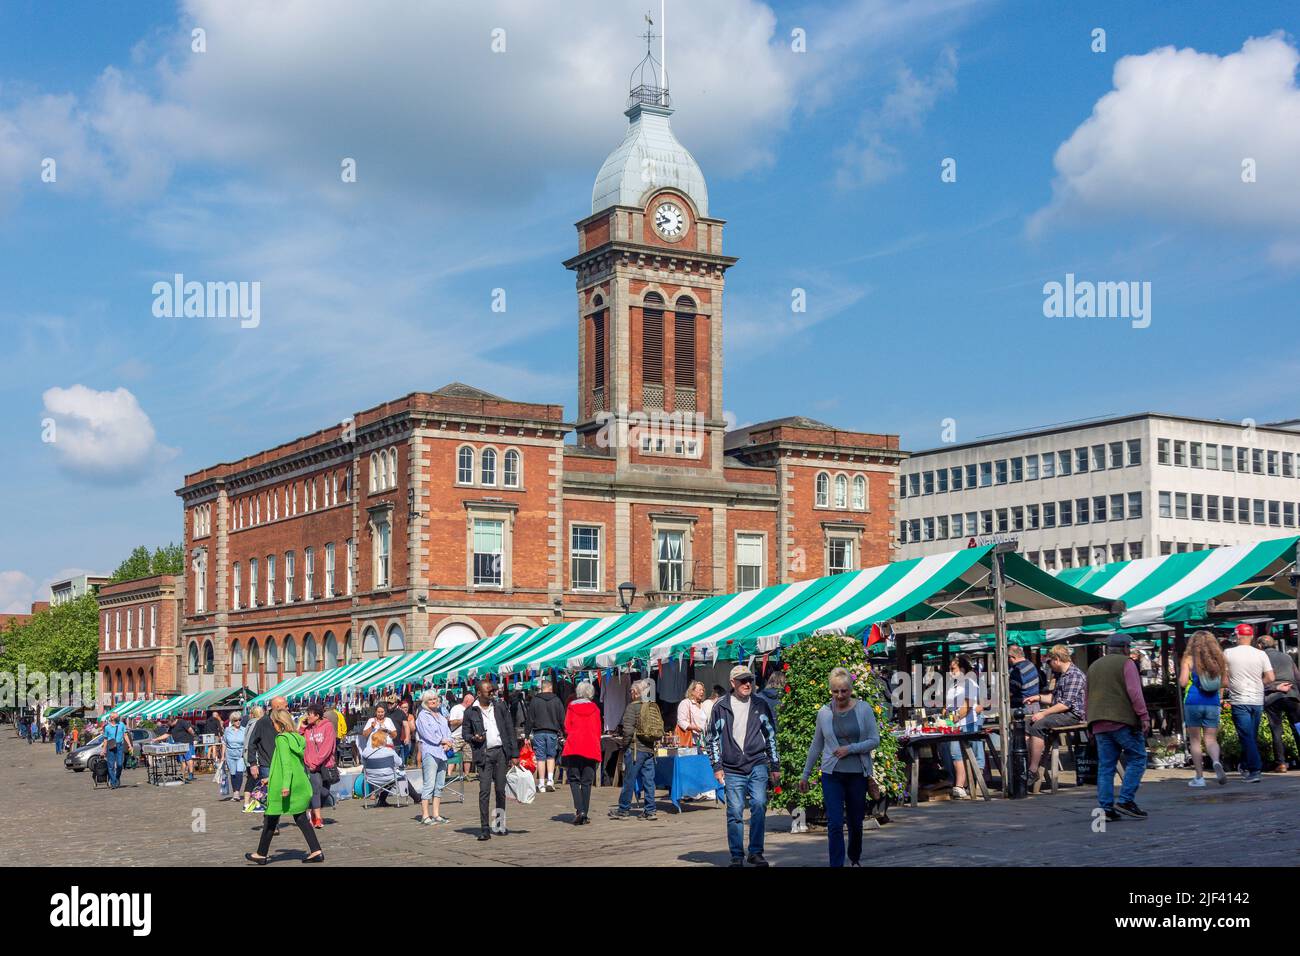 Chesterfield Market, Market Hall New Square, Chesterfield, Derbyshire, England, United Kingdom Stock Photo